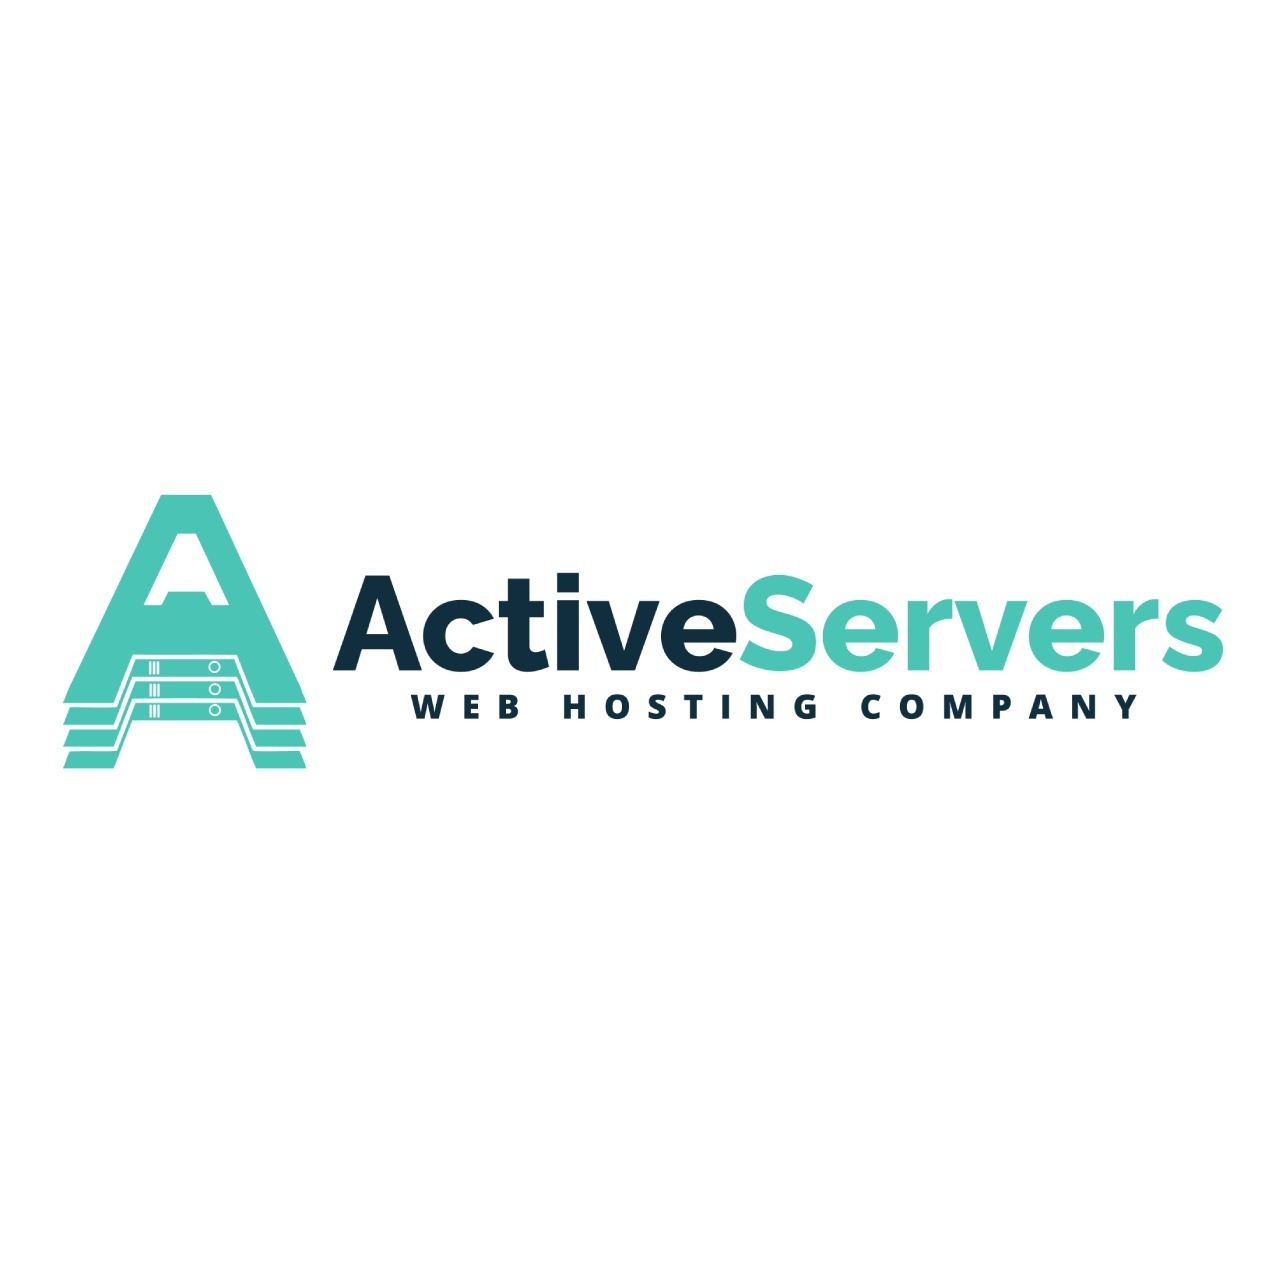 Active Servers|Accounting Services|Professional Services